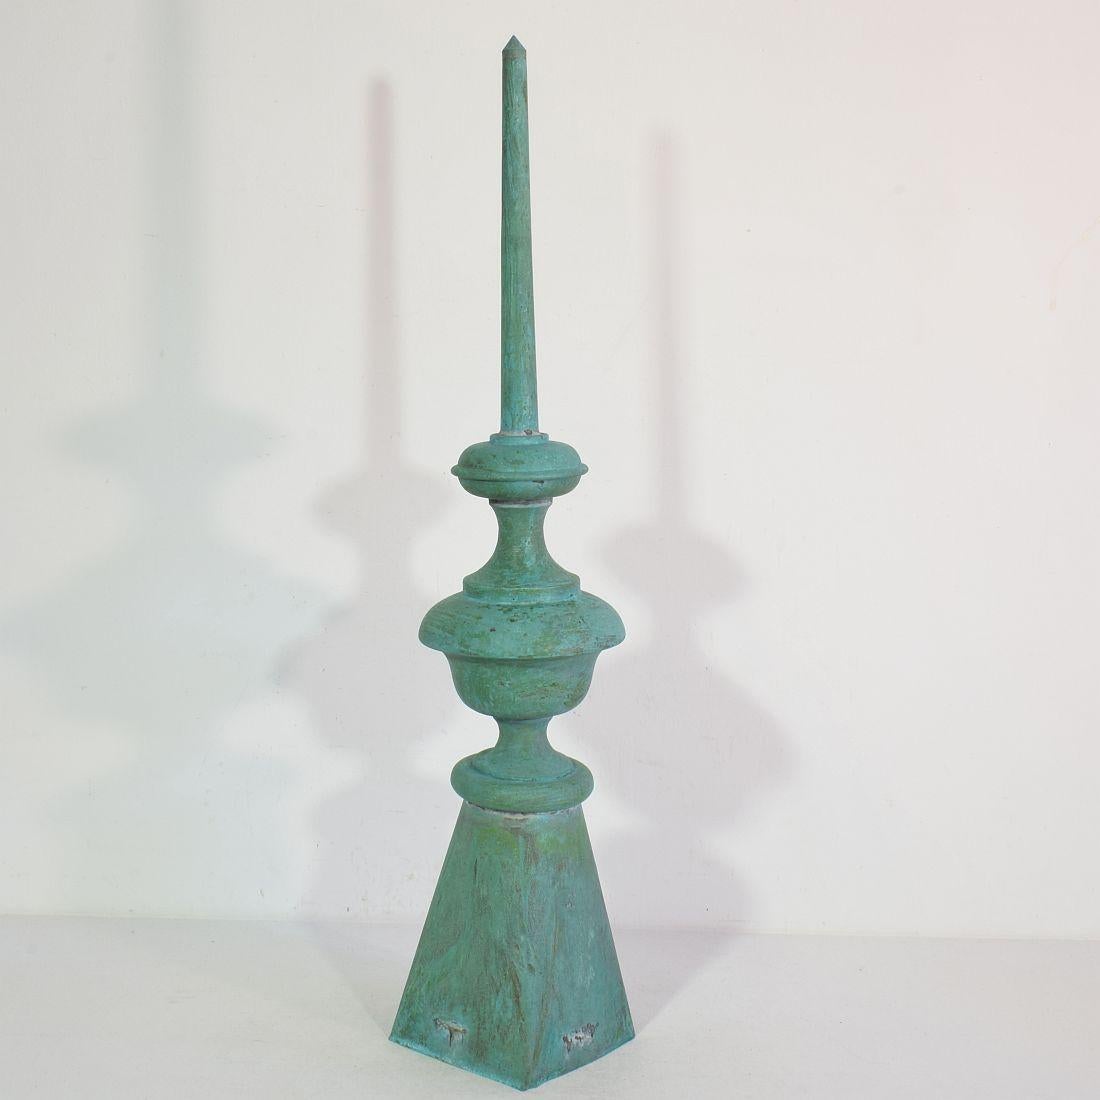 Beautiful weathered copper roof finial, with a stunning patine,
France, late 19th century. Weathered.